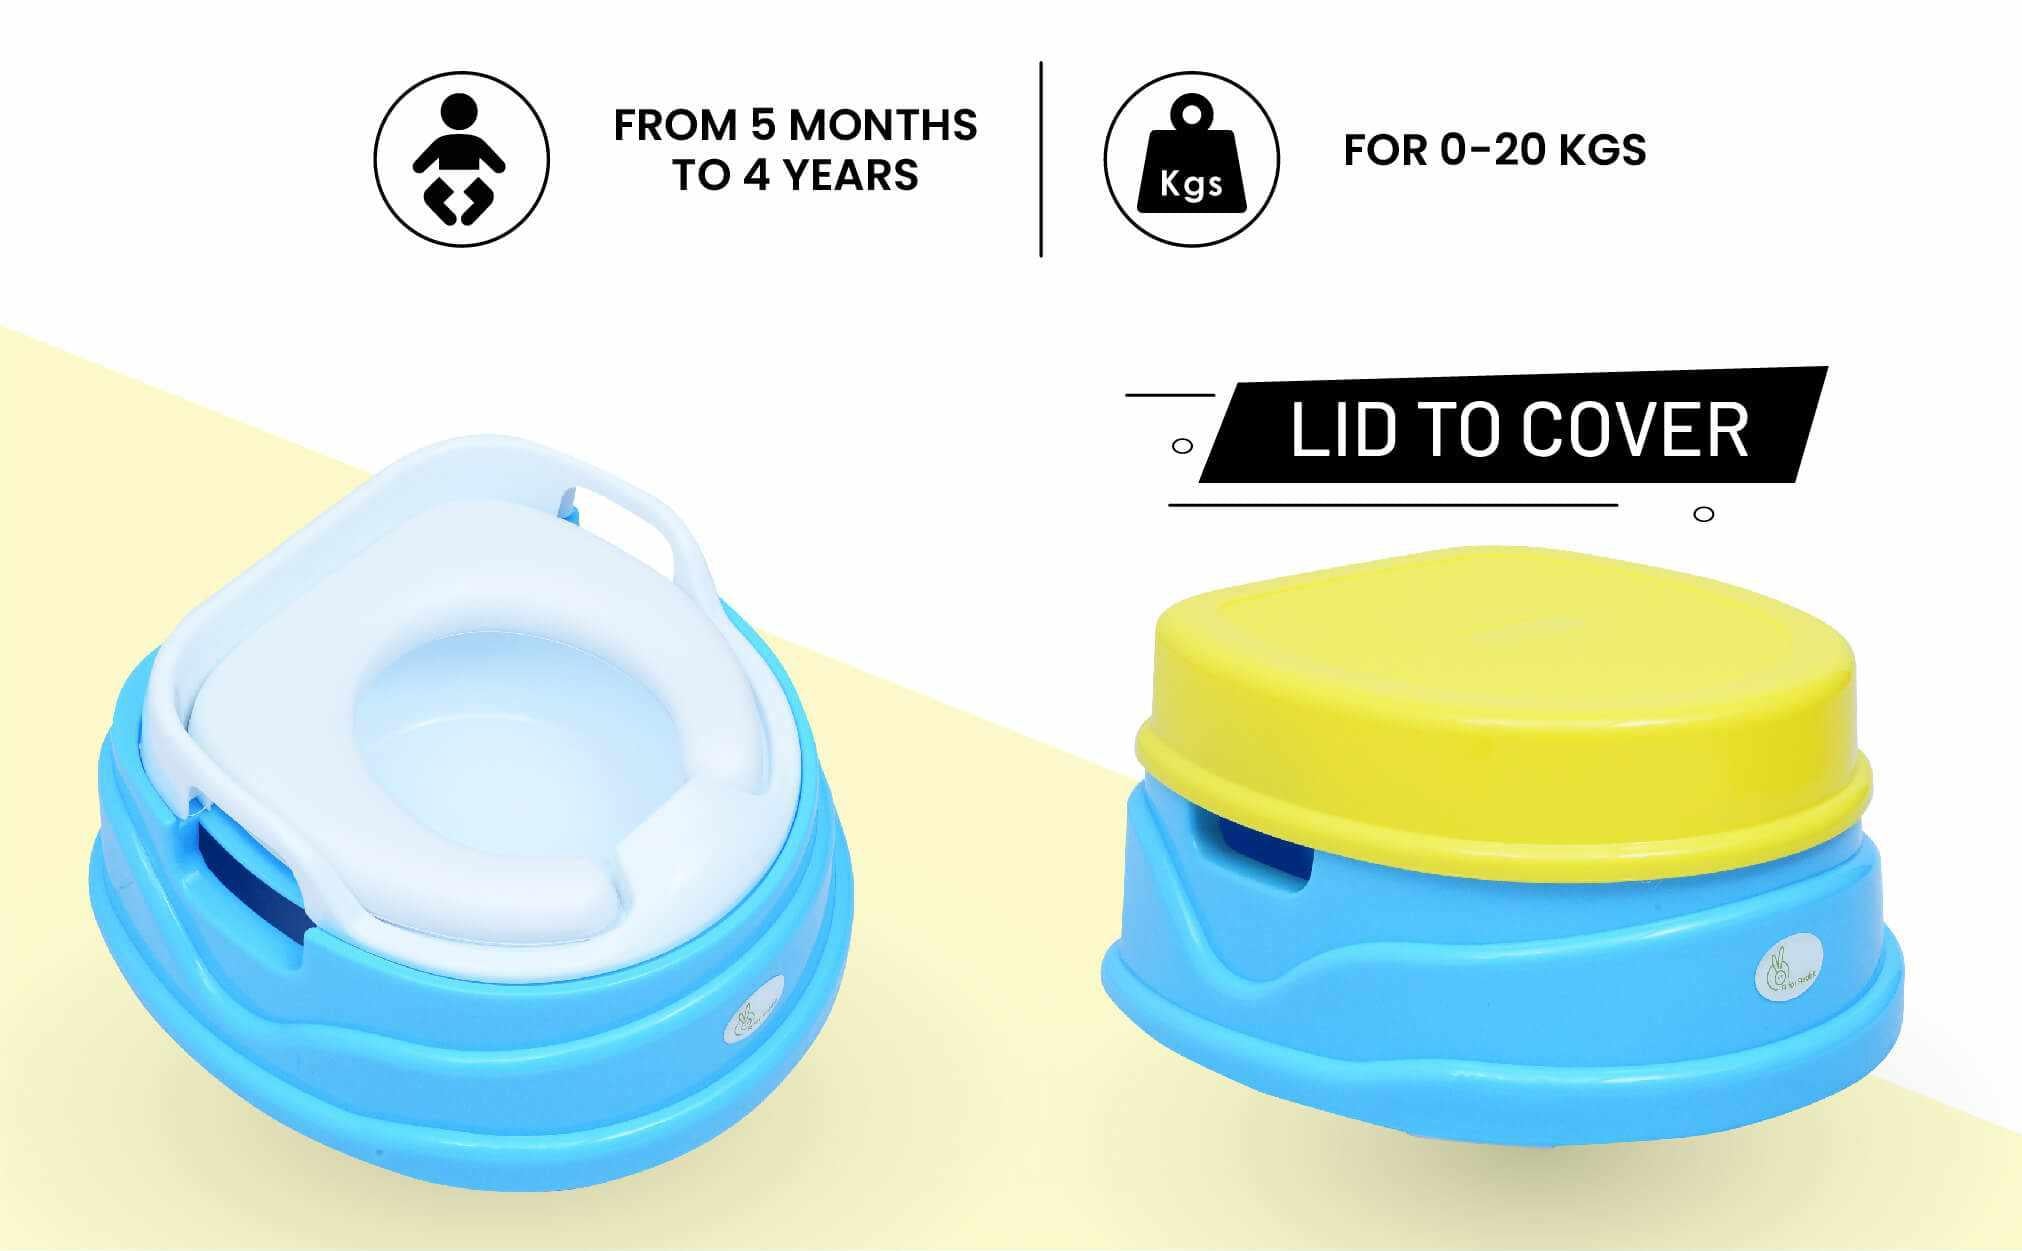 Ding Dong – The Convertible 4-in-1 Potty Training Seat